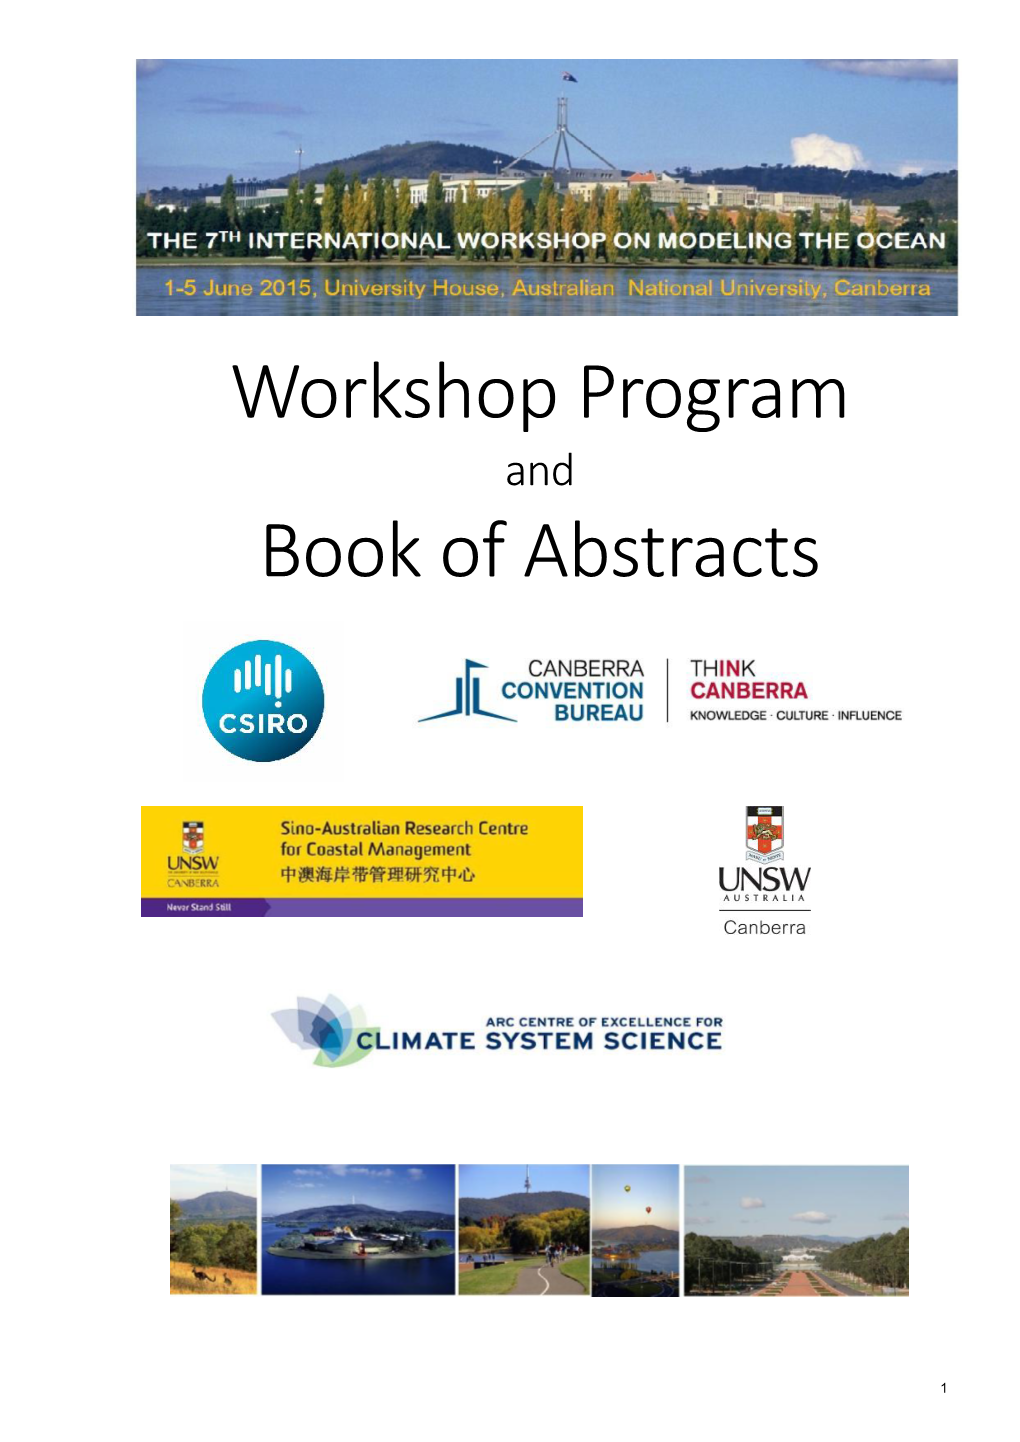 Program and Book of Abstracts